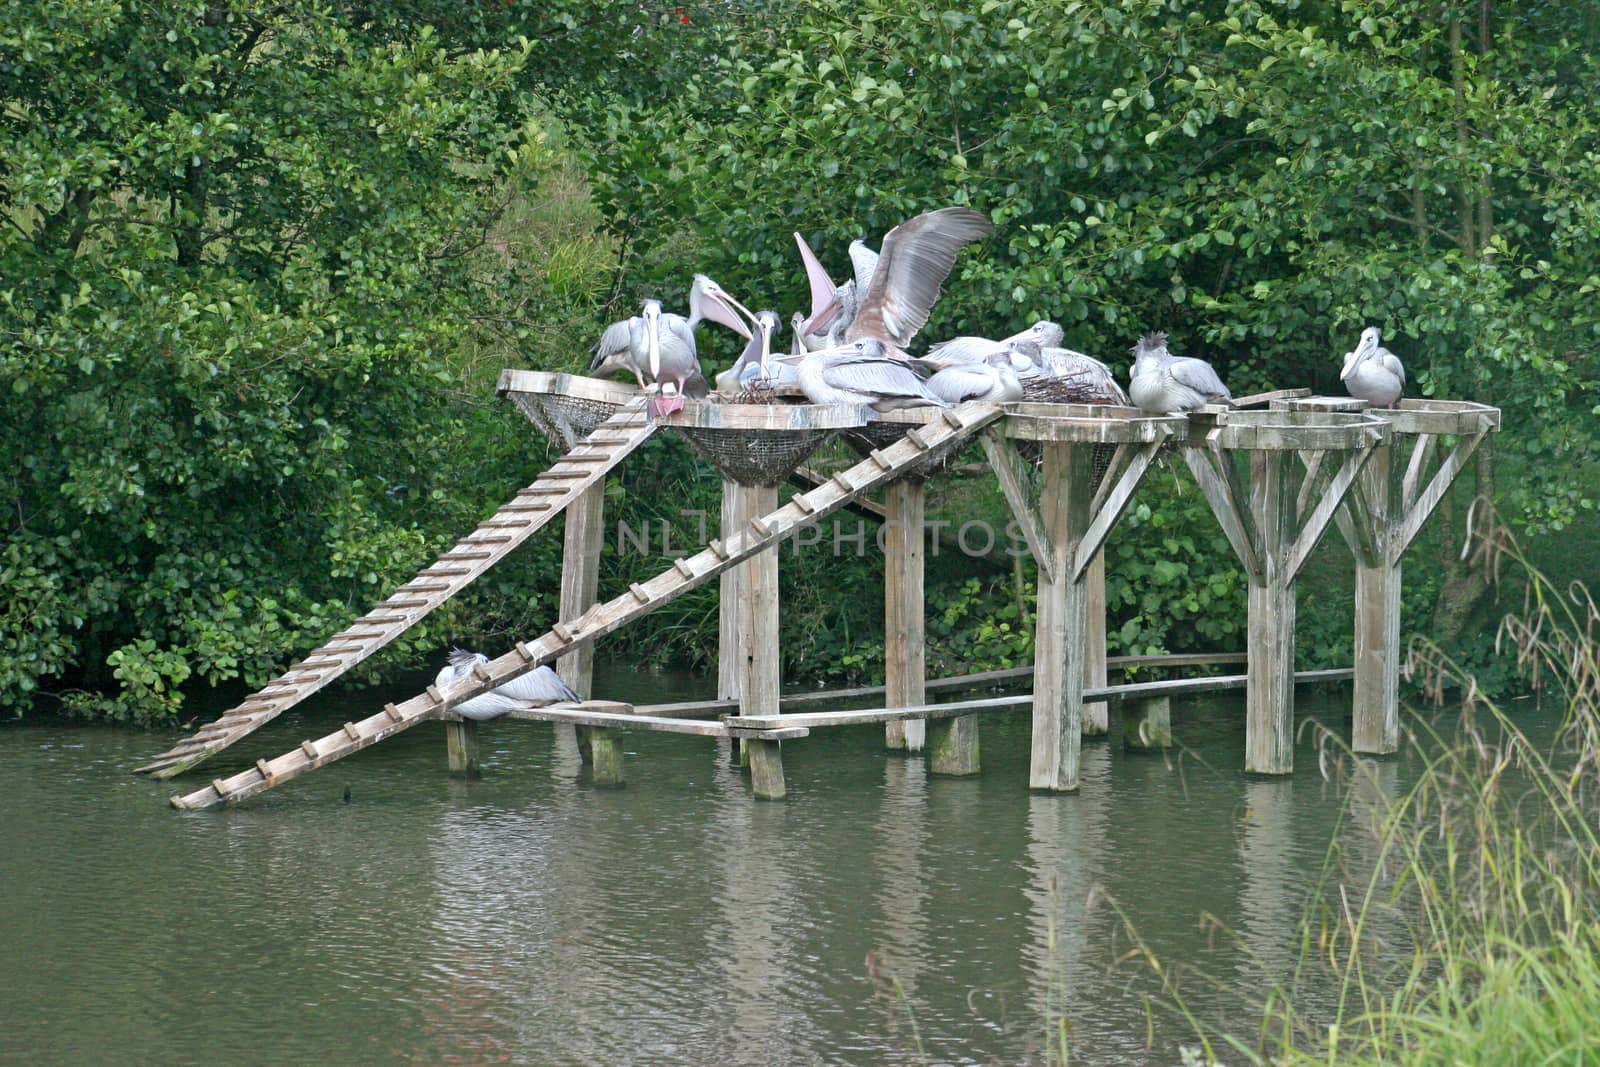 A group of pelicans sitting on a platform